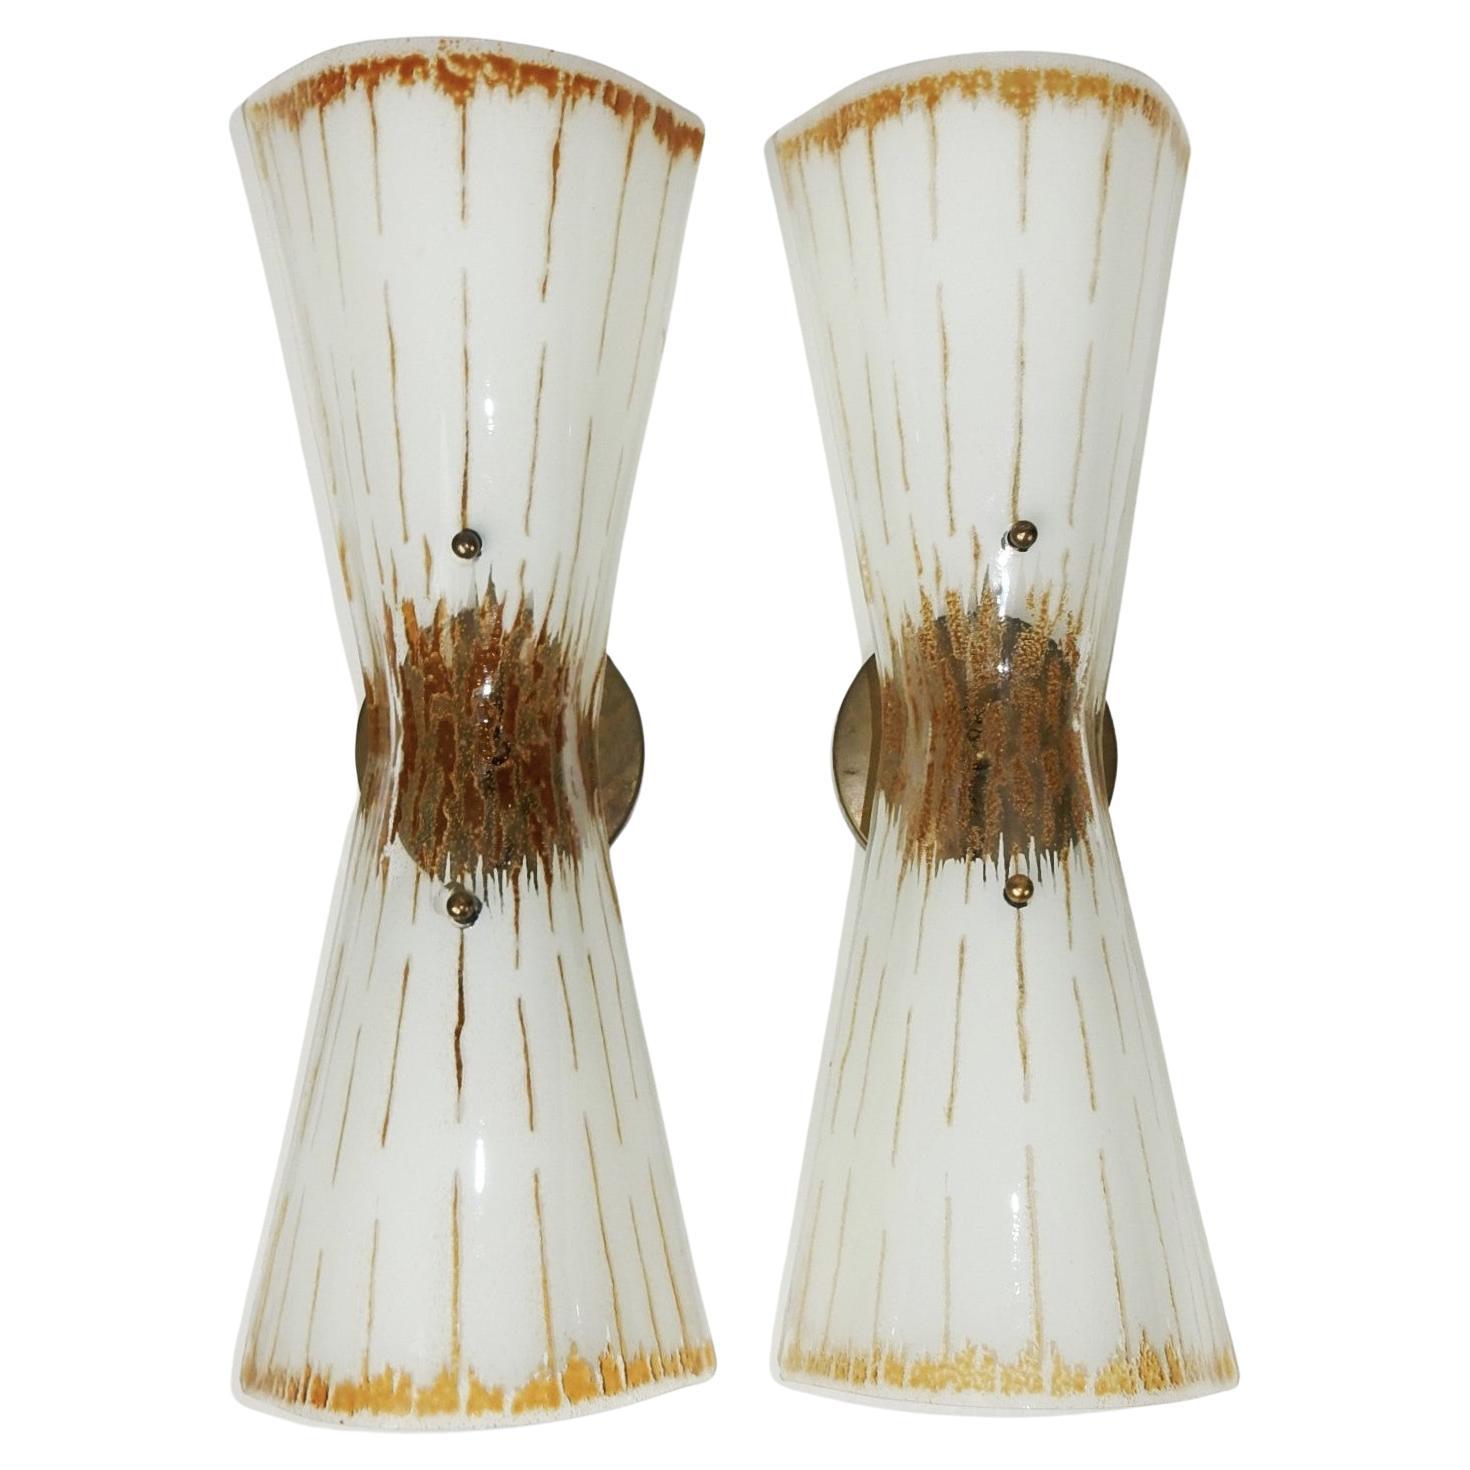 1950's glass hourglass Lightolier wall sconces.
Attributed to Gerold Thurston design.
Textured glass with brass hardware.
4-1/2in wall cap.